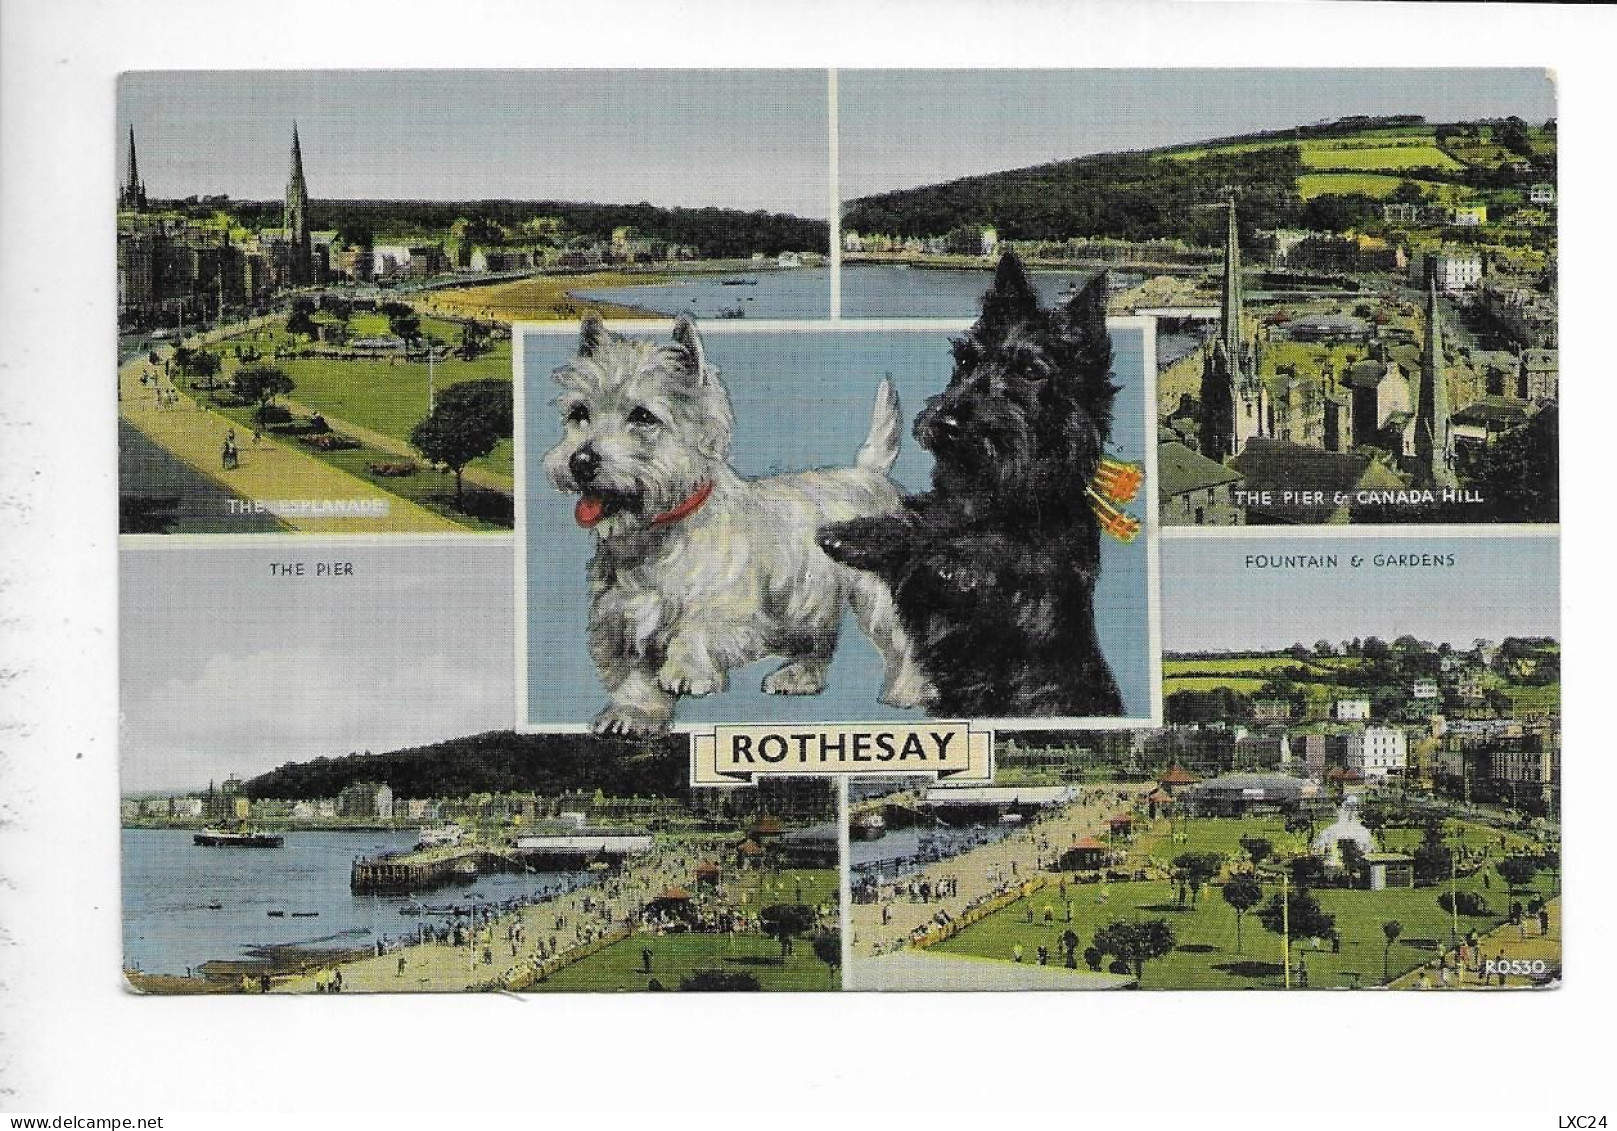 ROTHESAY. - Bute